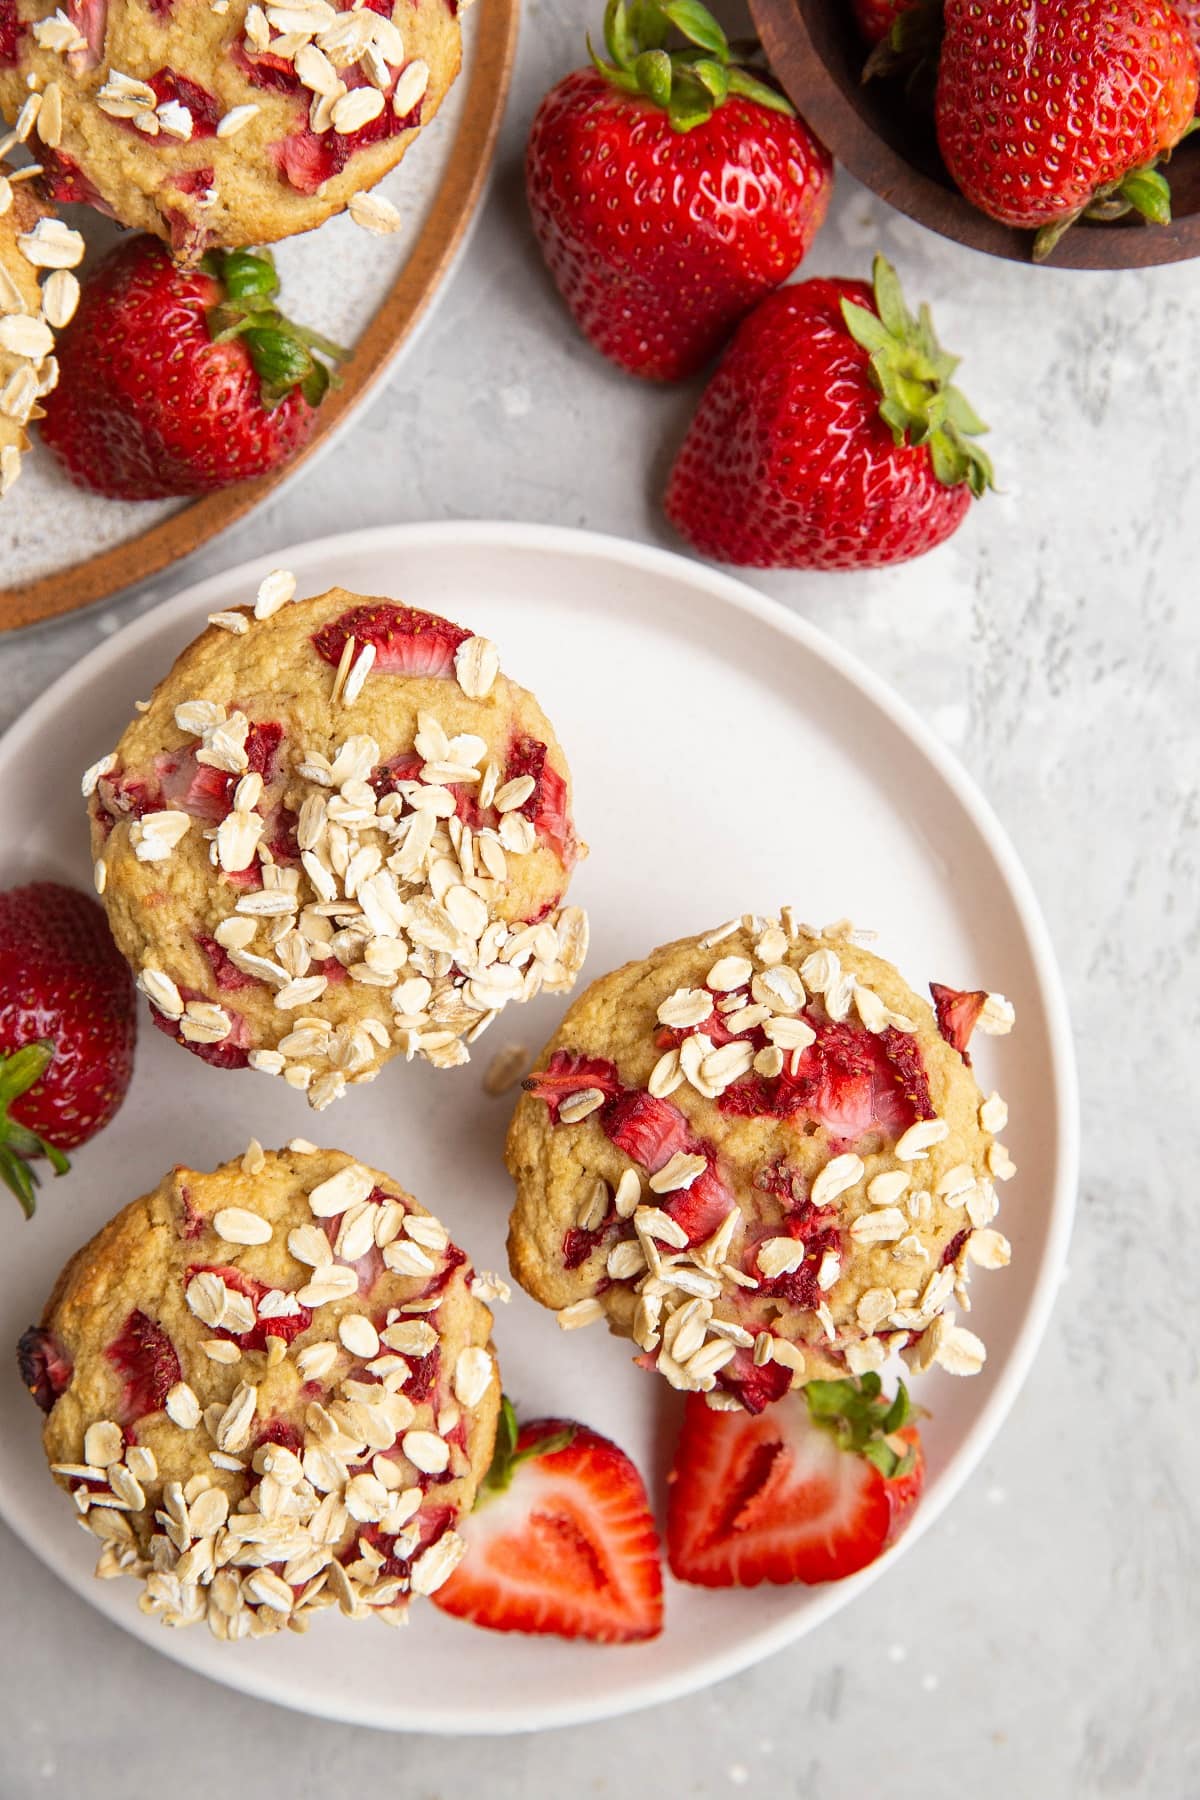 Two plates with strawberry muffins and fresh strawberries to the side.